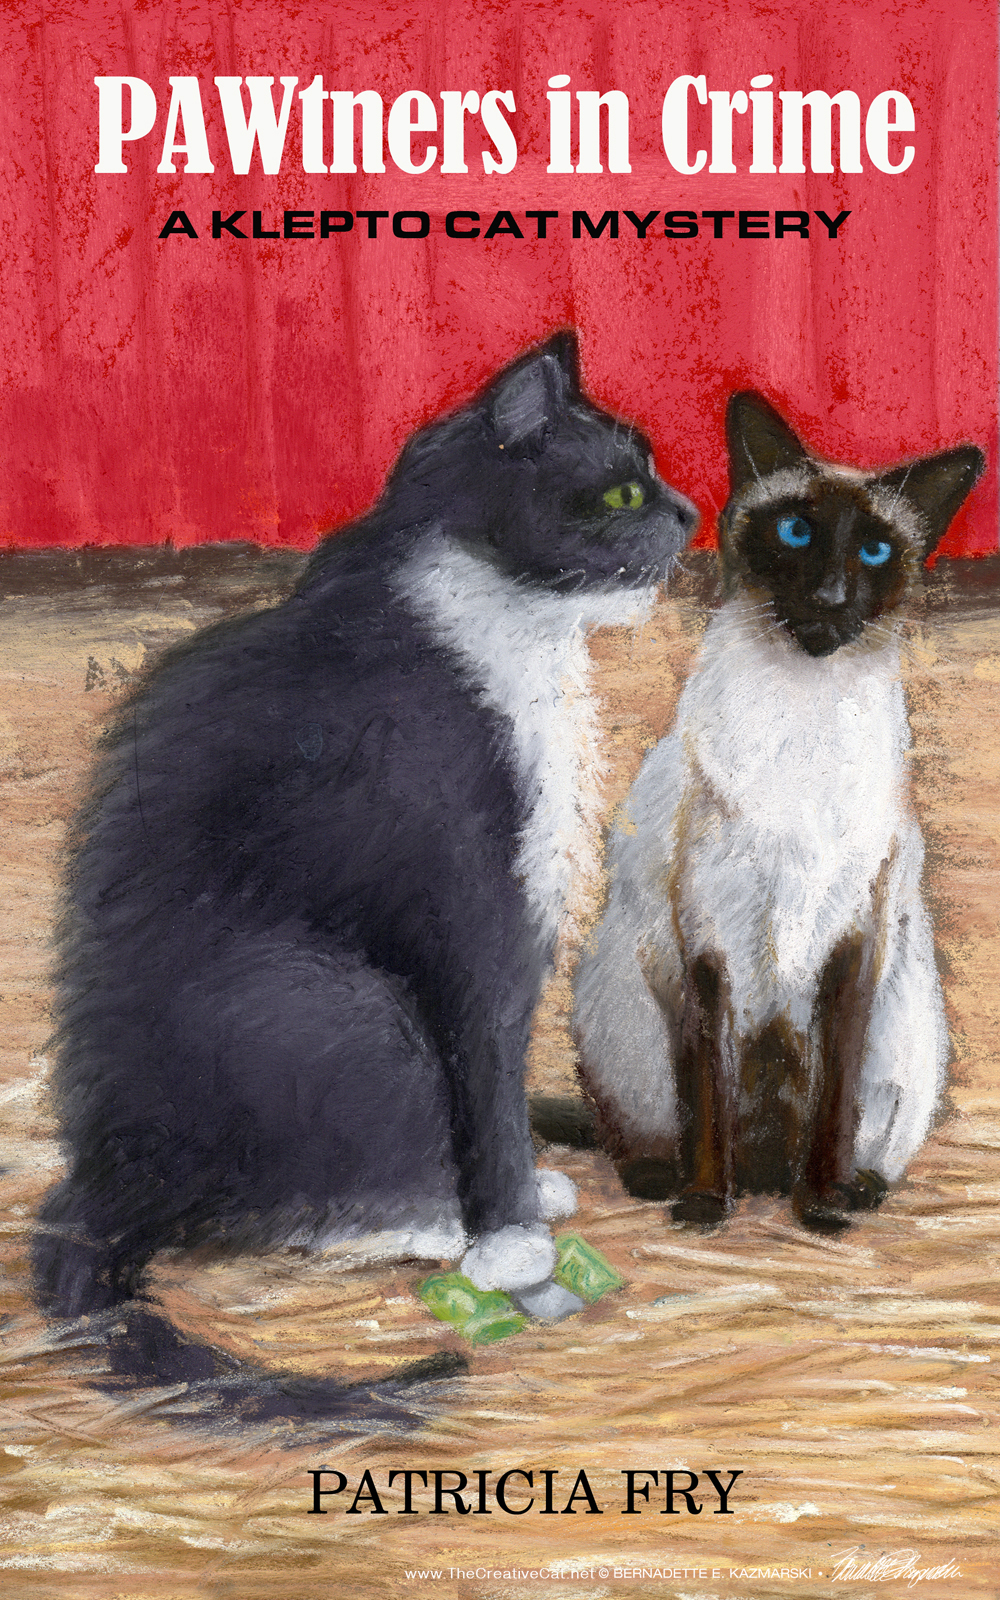 The final cover for "PAWtners in Crime" by Patricia Fry.